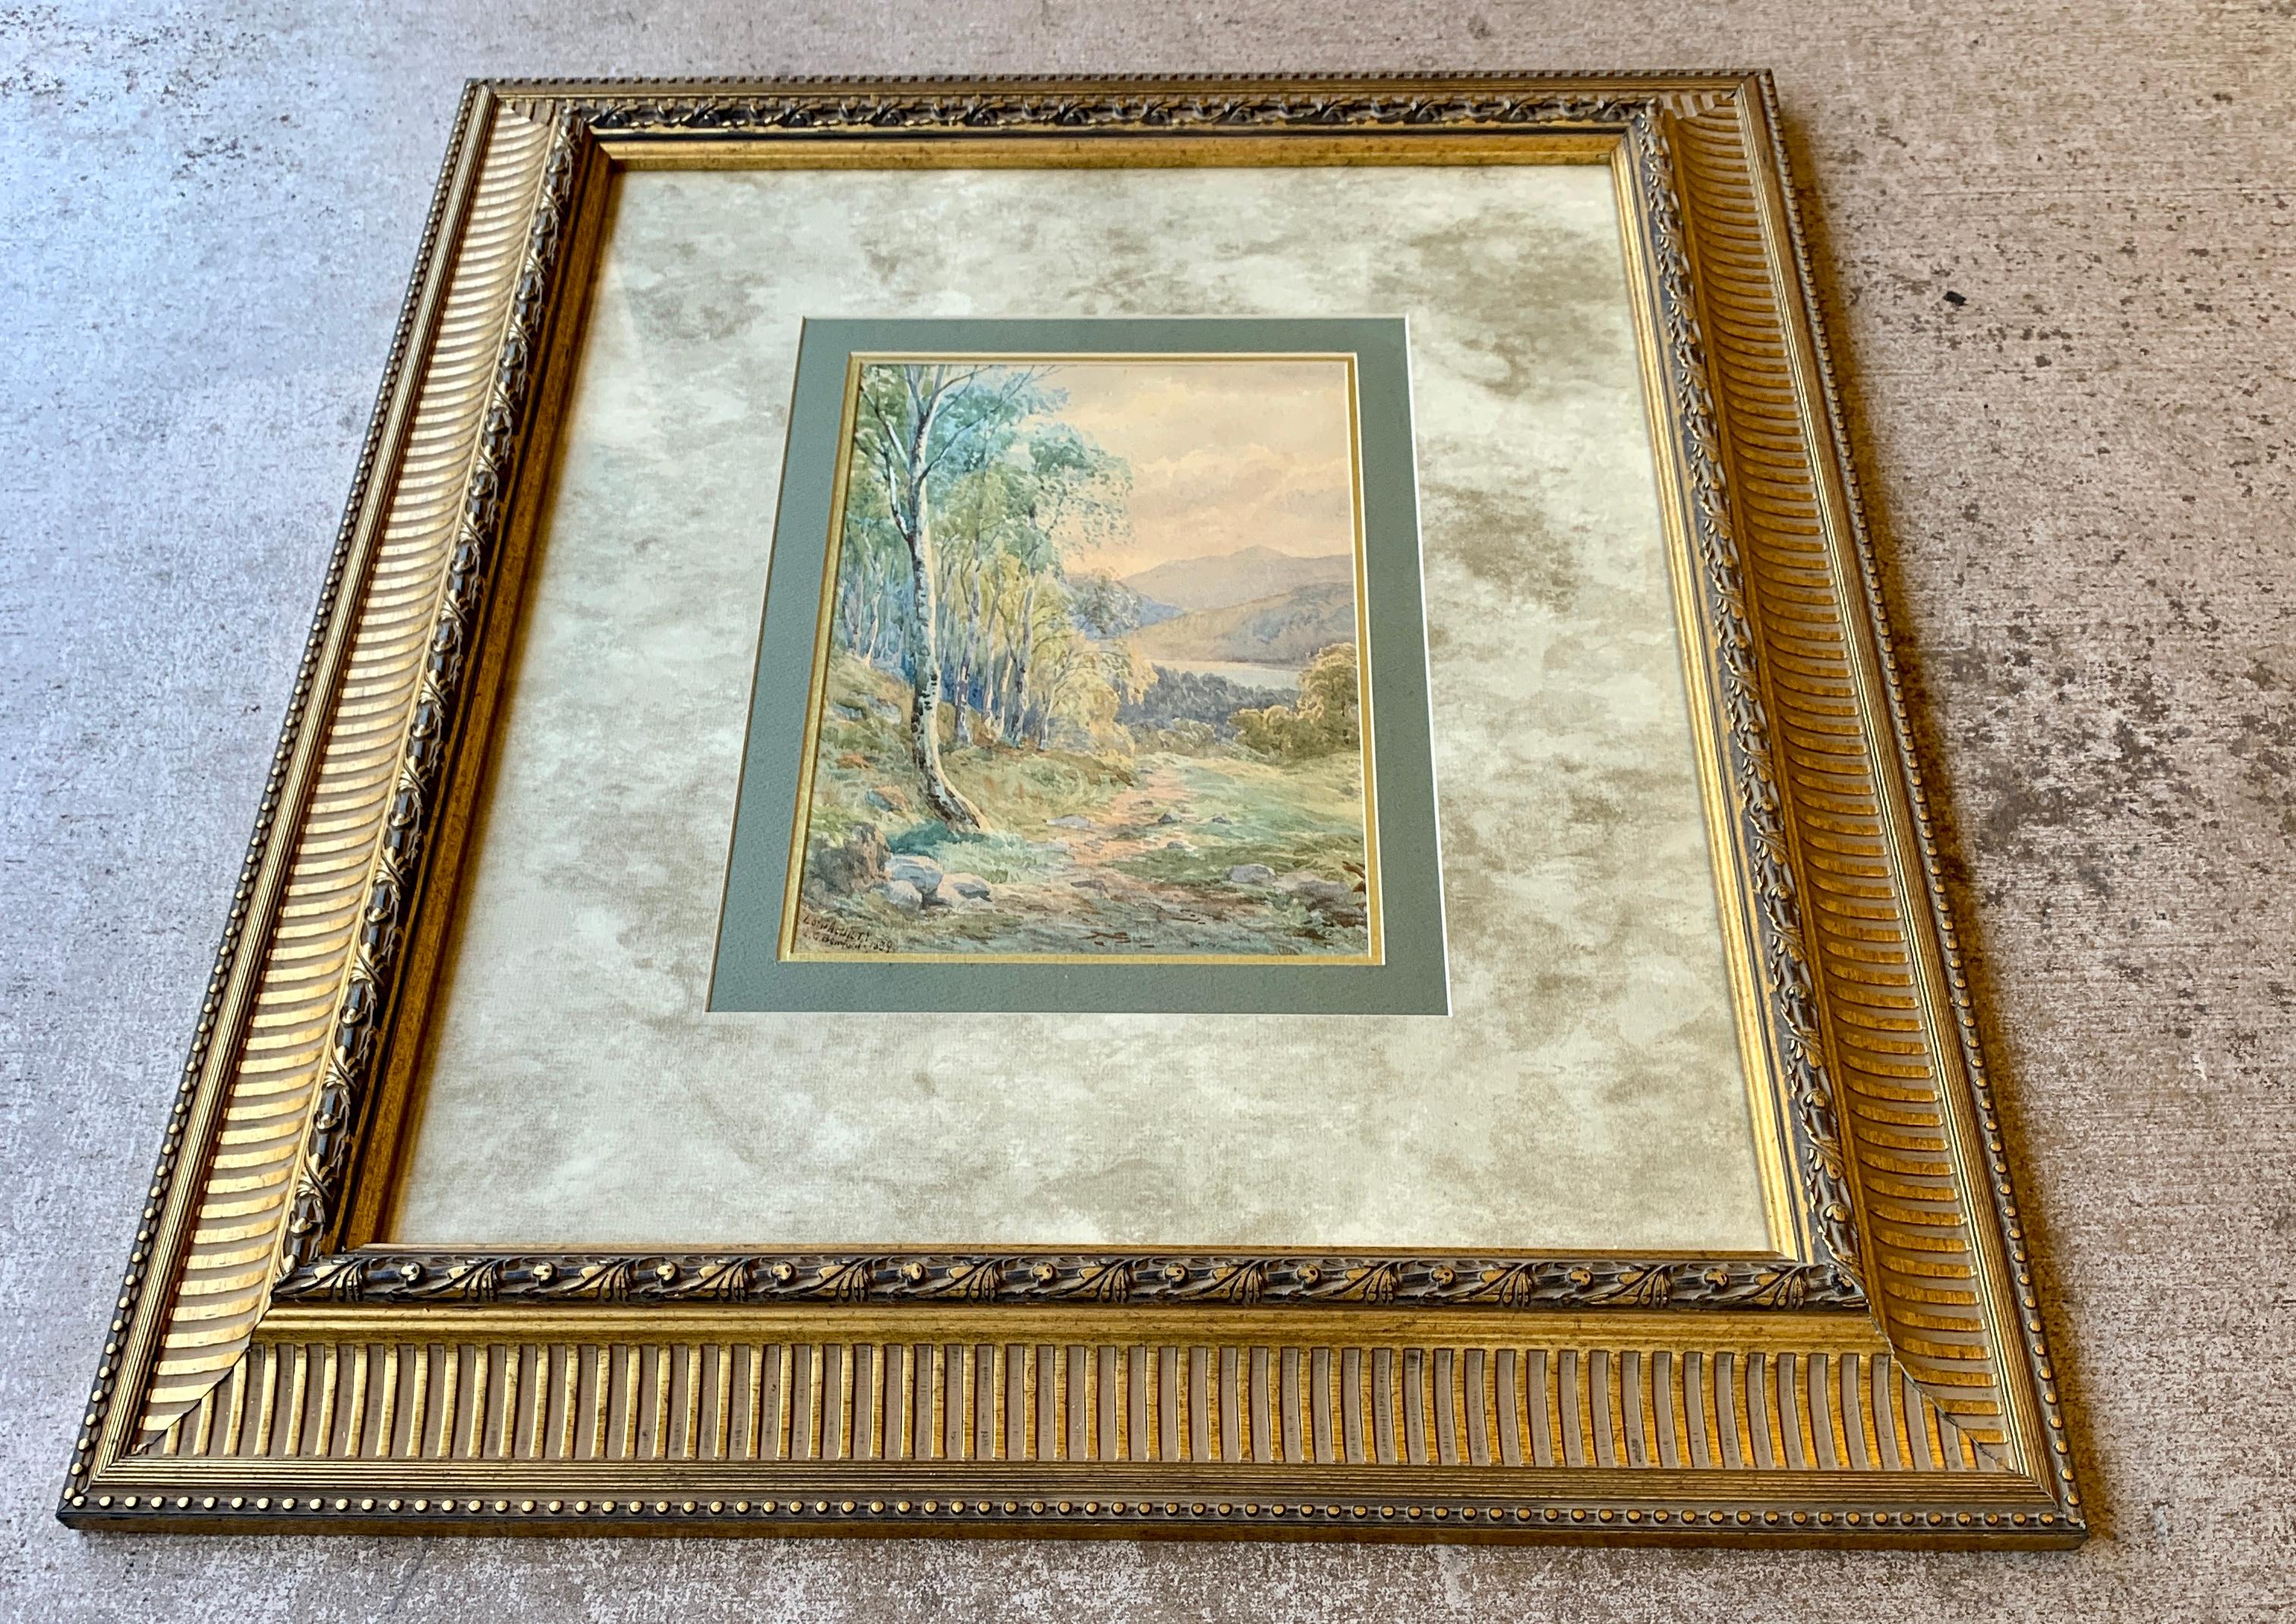 Other Original 19th Century “Loch Achilty” Watercolor Painting by L.G. Bomford, 1889 For Sale